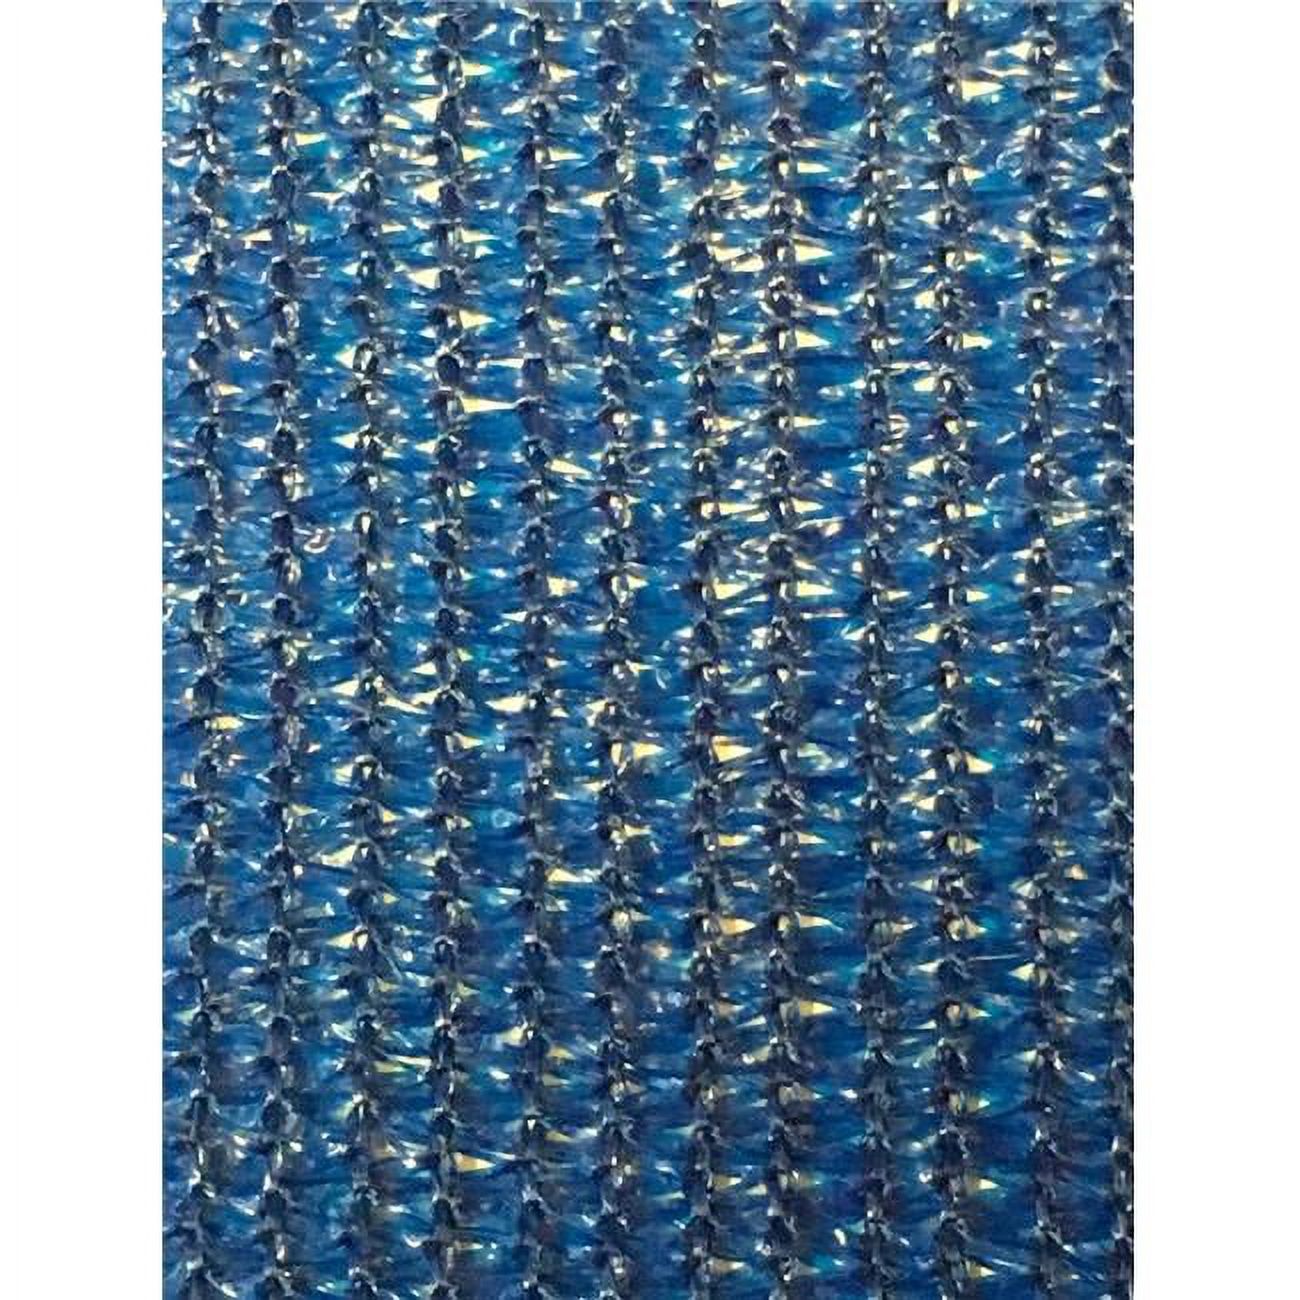 Riverstone Industries PF-620-Blue 5.8 x 20 ft. Knitted Privacy Cloth - Blue - image 1 of 4